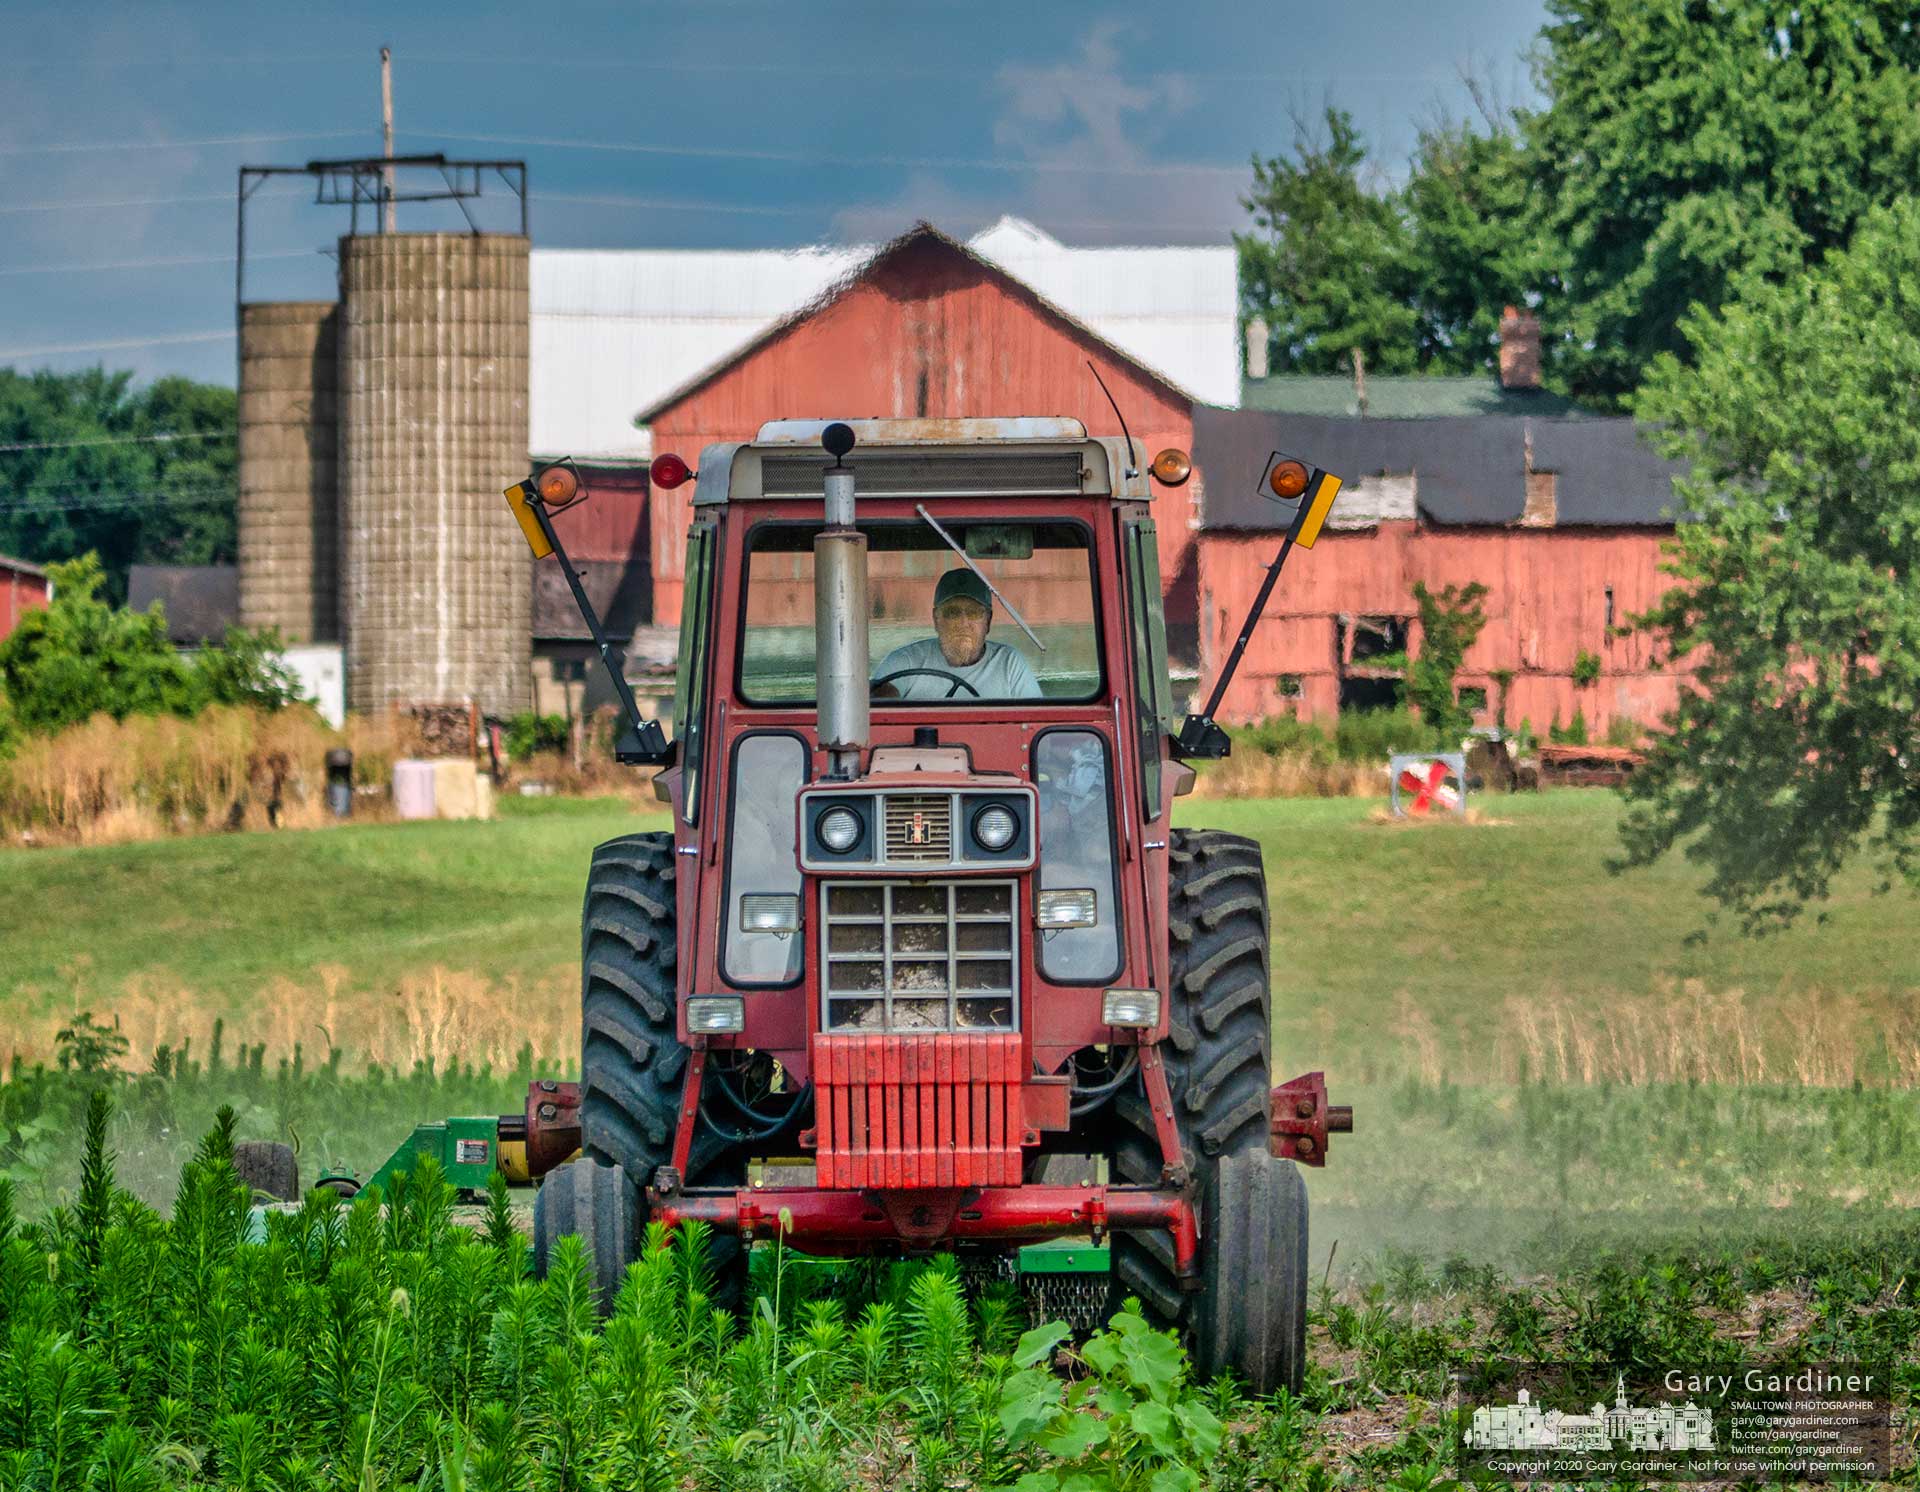 A farmer with a tractor towing a mower cuts weeds and grass in the lower field of the Yarnell Farm between Cleveland and Africa Road. My Final Photo for July 24.